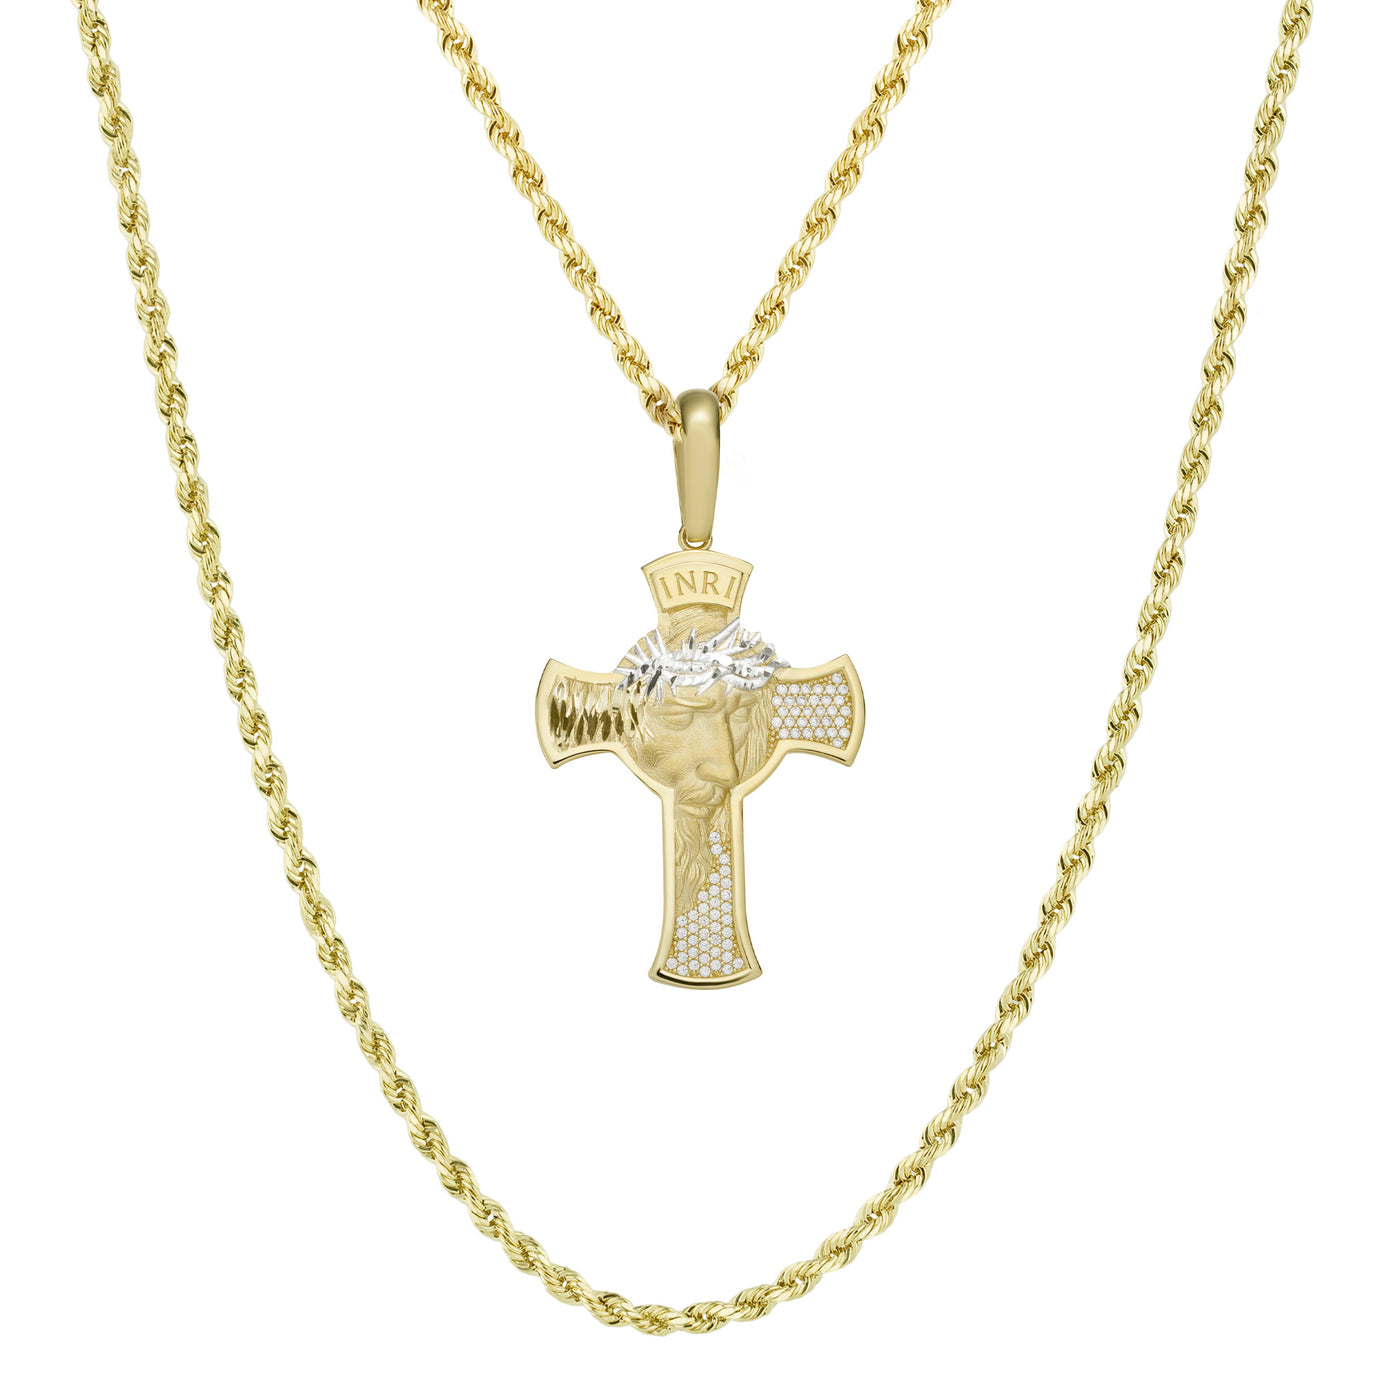 2" Face of Jesus CZ Cross Two Tone Pendant & Chain Necklace Set 10K Yellow White Gold